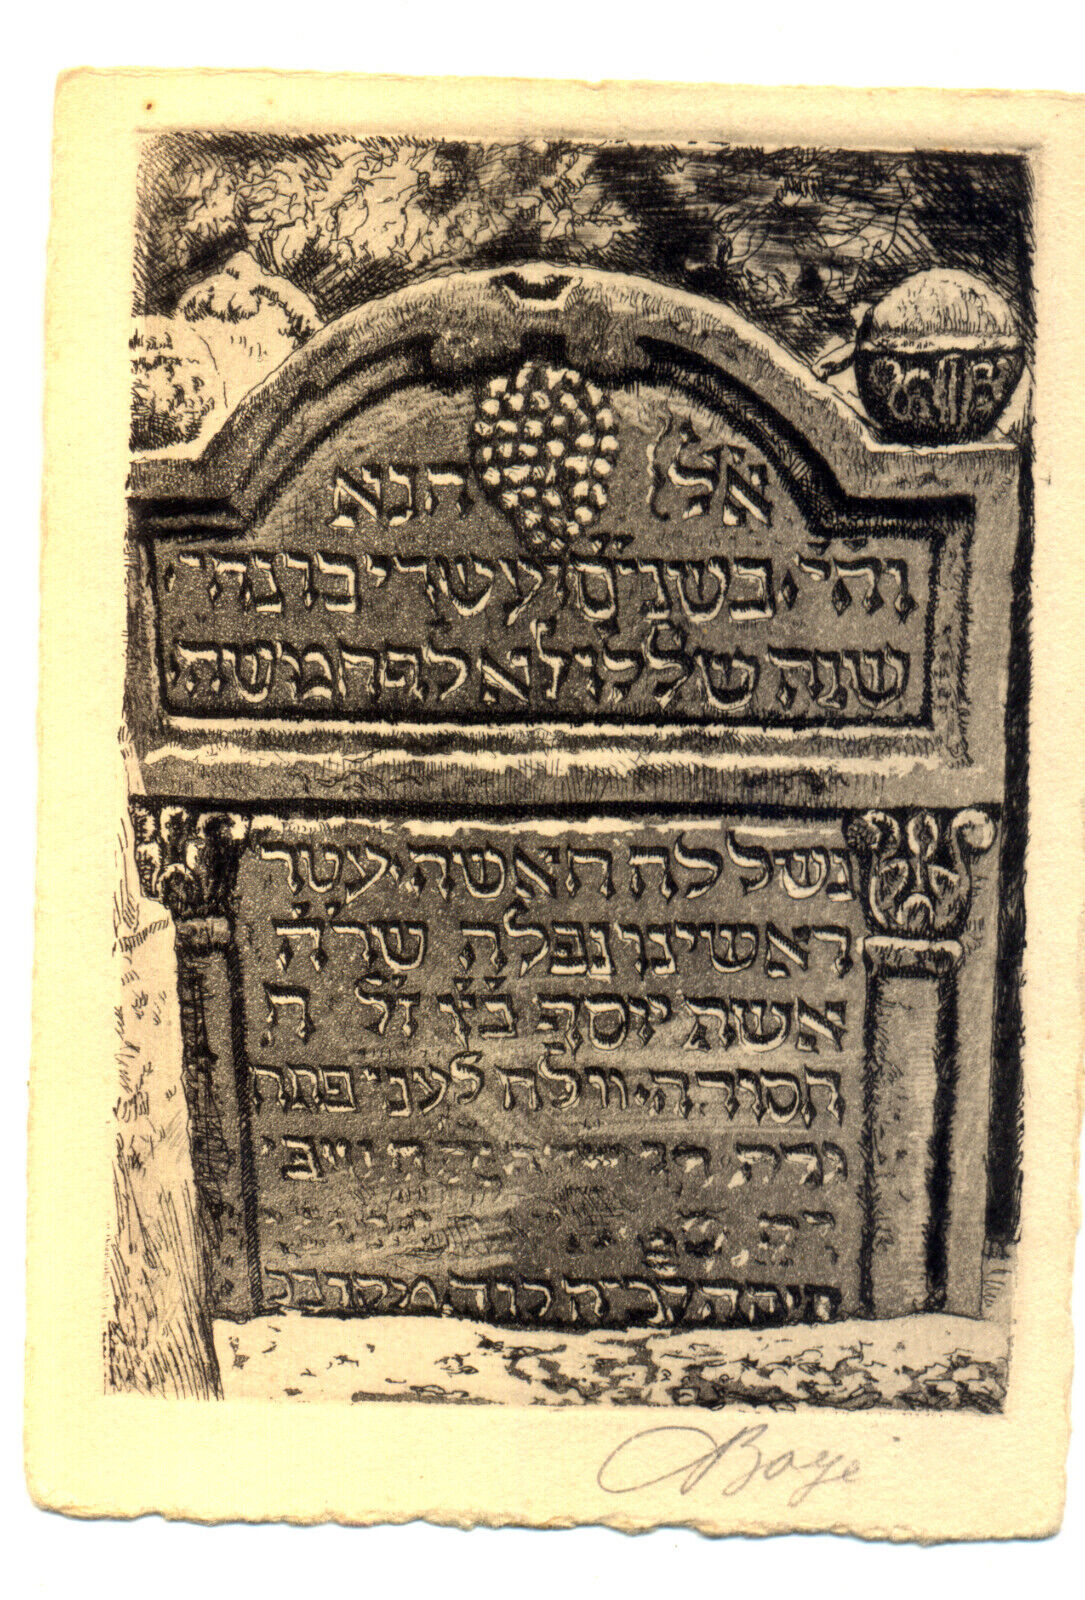 JUDAICA Postcard The old cemetery of the Jews at Prague signed by Boyè, C.